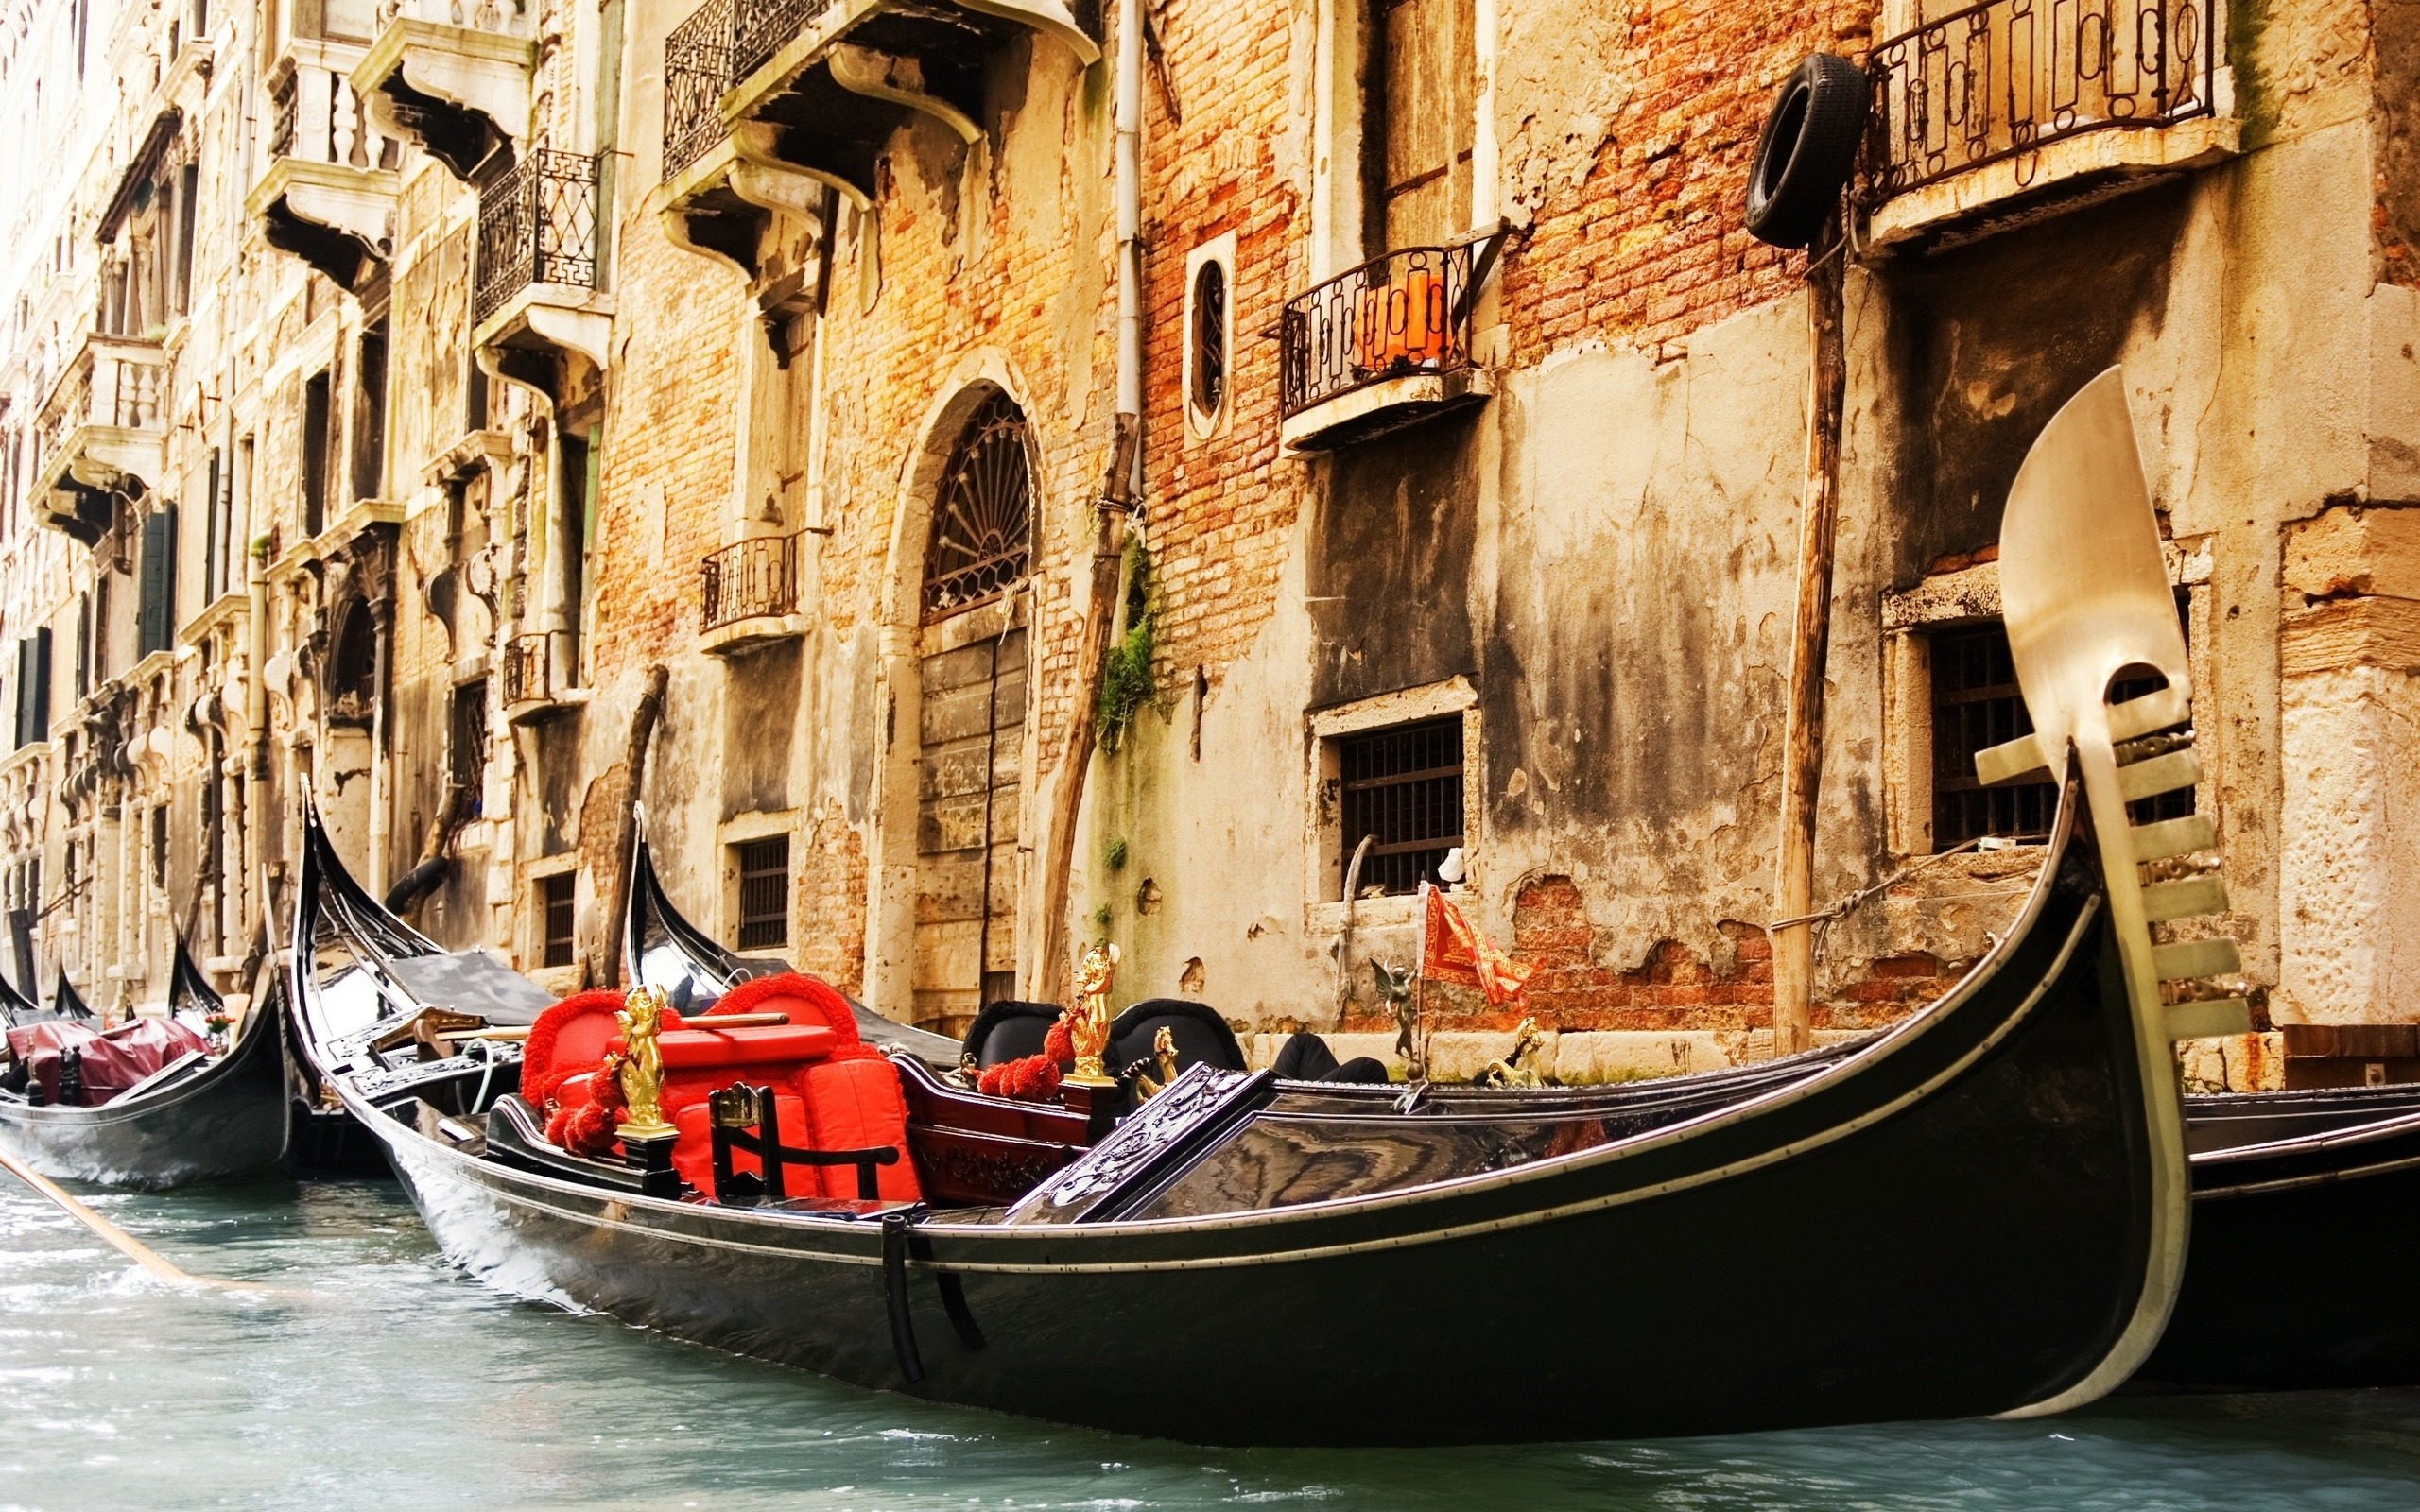 Venice Gondola in Italy: A picturesque scene of a gondola floating along the canals of Venice.